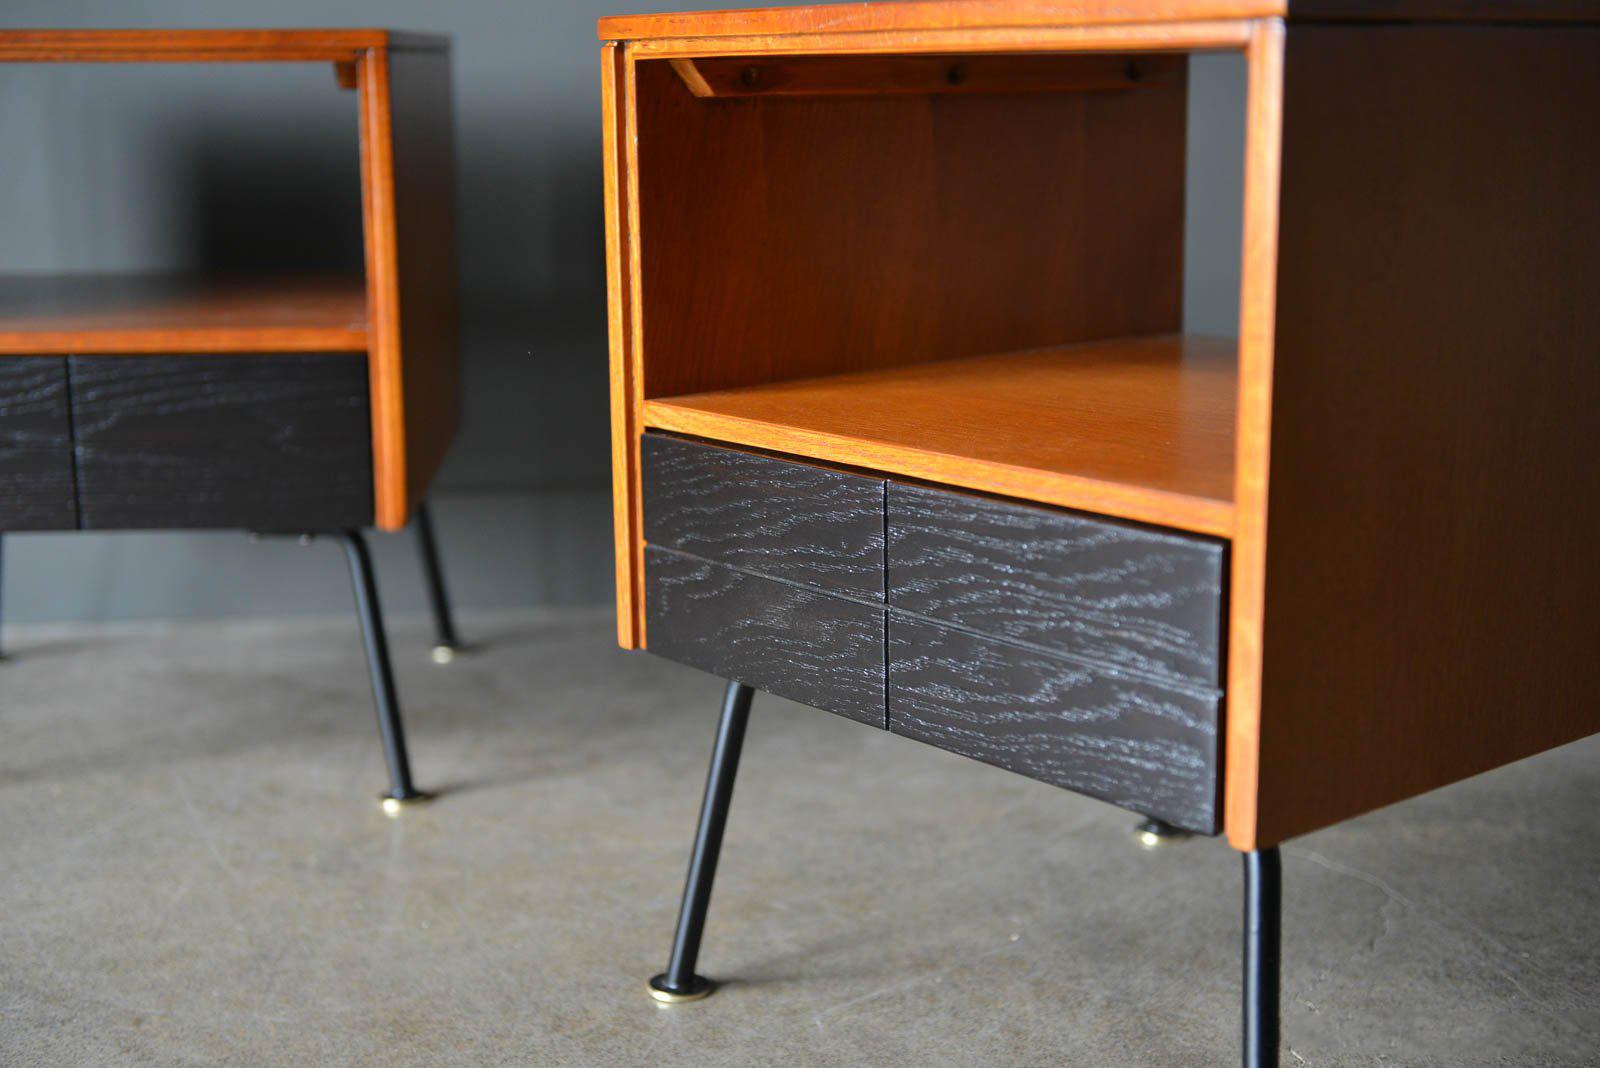 Raymond Loewy for Mengel side tables, circa 1950. Professionally restored in showroom perfect condition. Classic design with brass capped feet on iron legs. Designed for Mengel Furniture, circa 1950. Perfect for nightstands as well, with lower